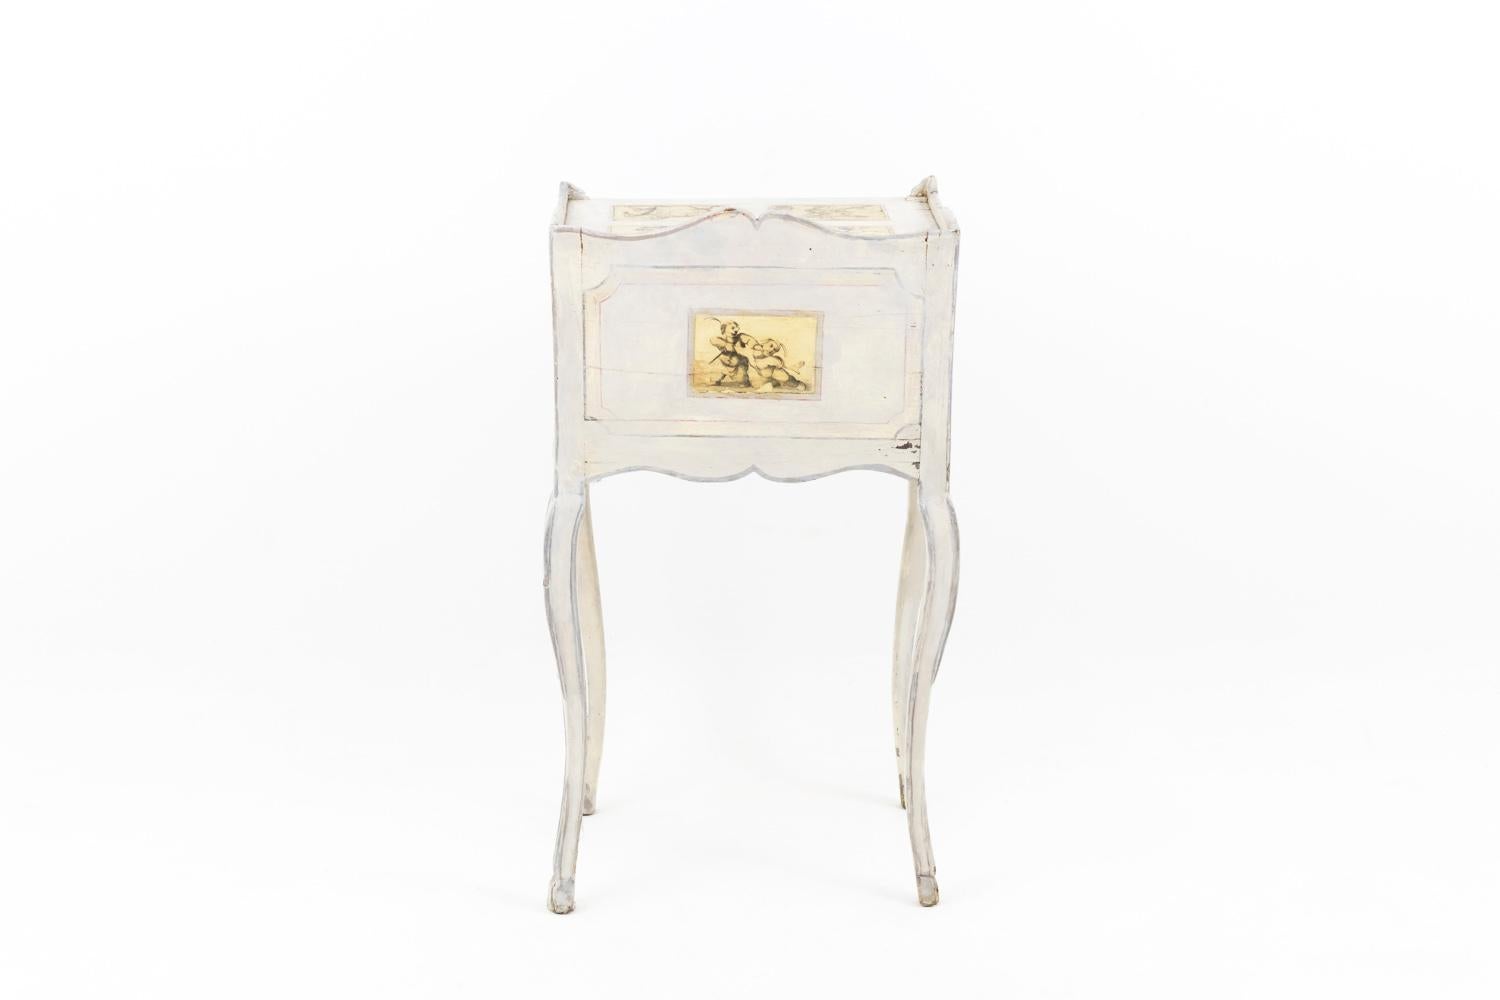 European Louis XV Period Bedside Table in White Lacquered Wood, 18th Century